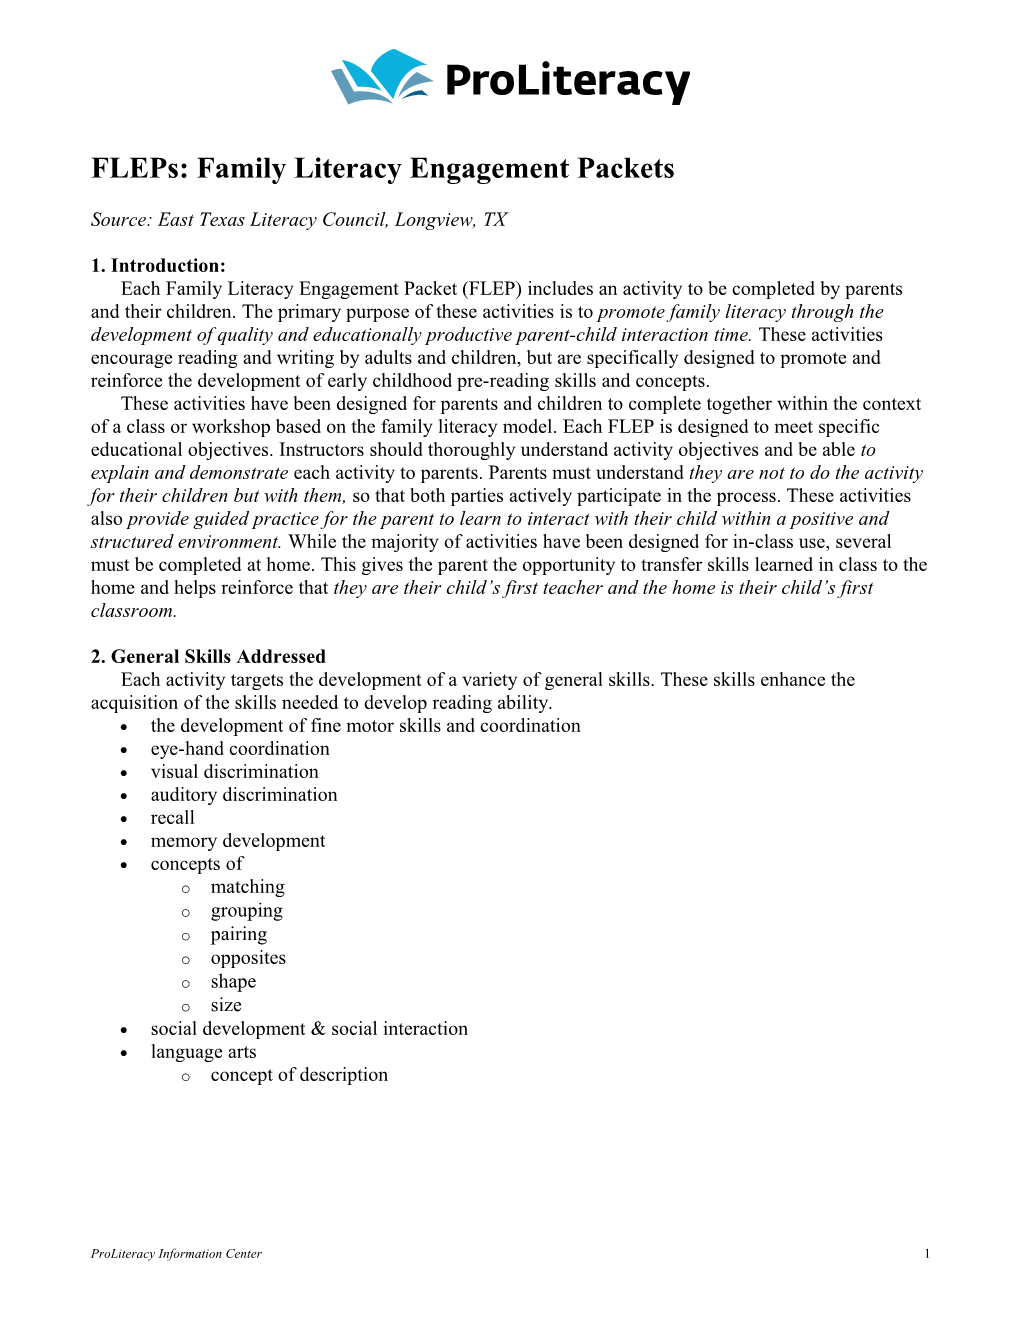 Fleps: Family Literacy Engagement Packets